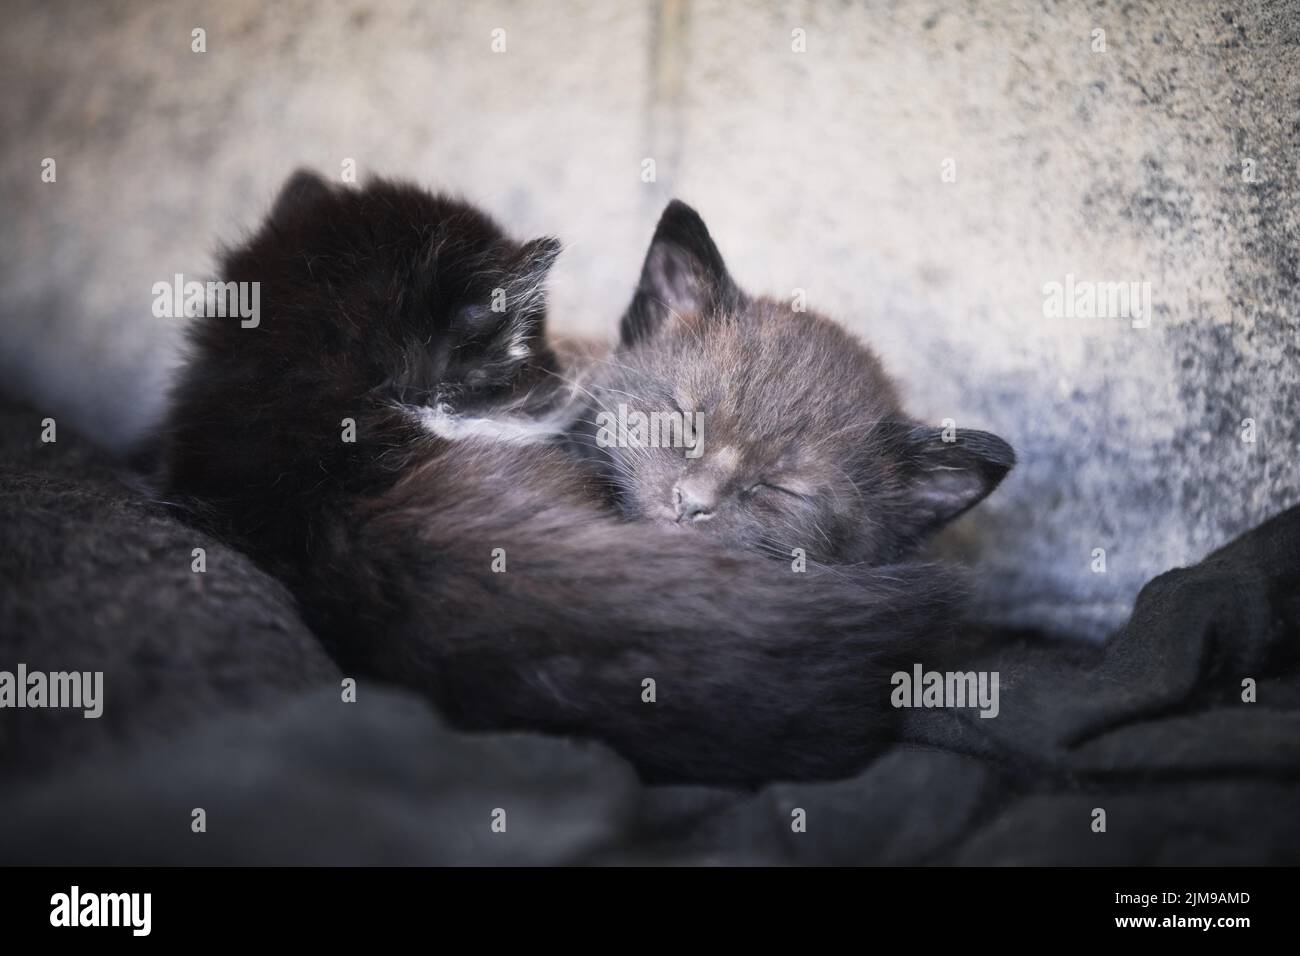 Small kittens sleeping together Stock Photo